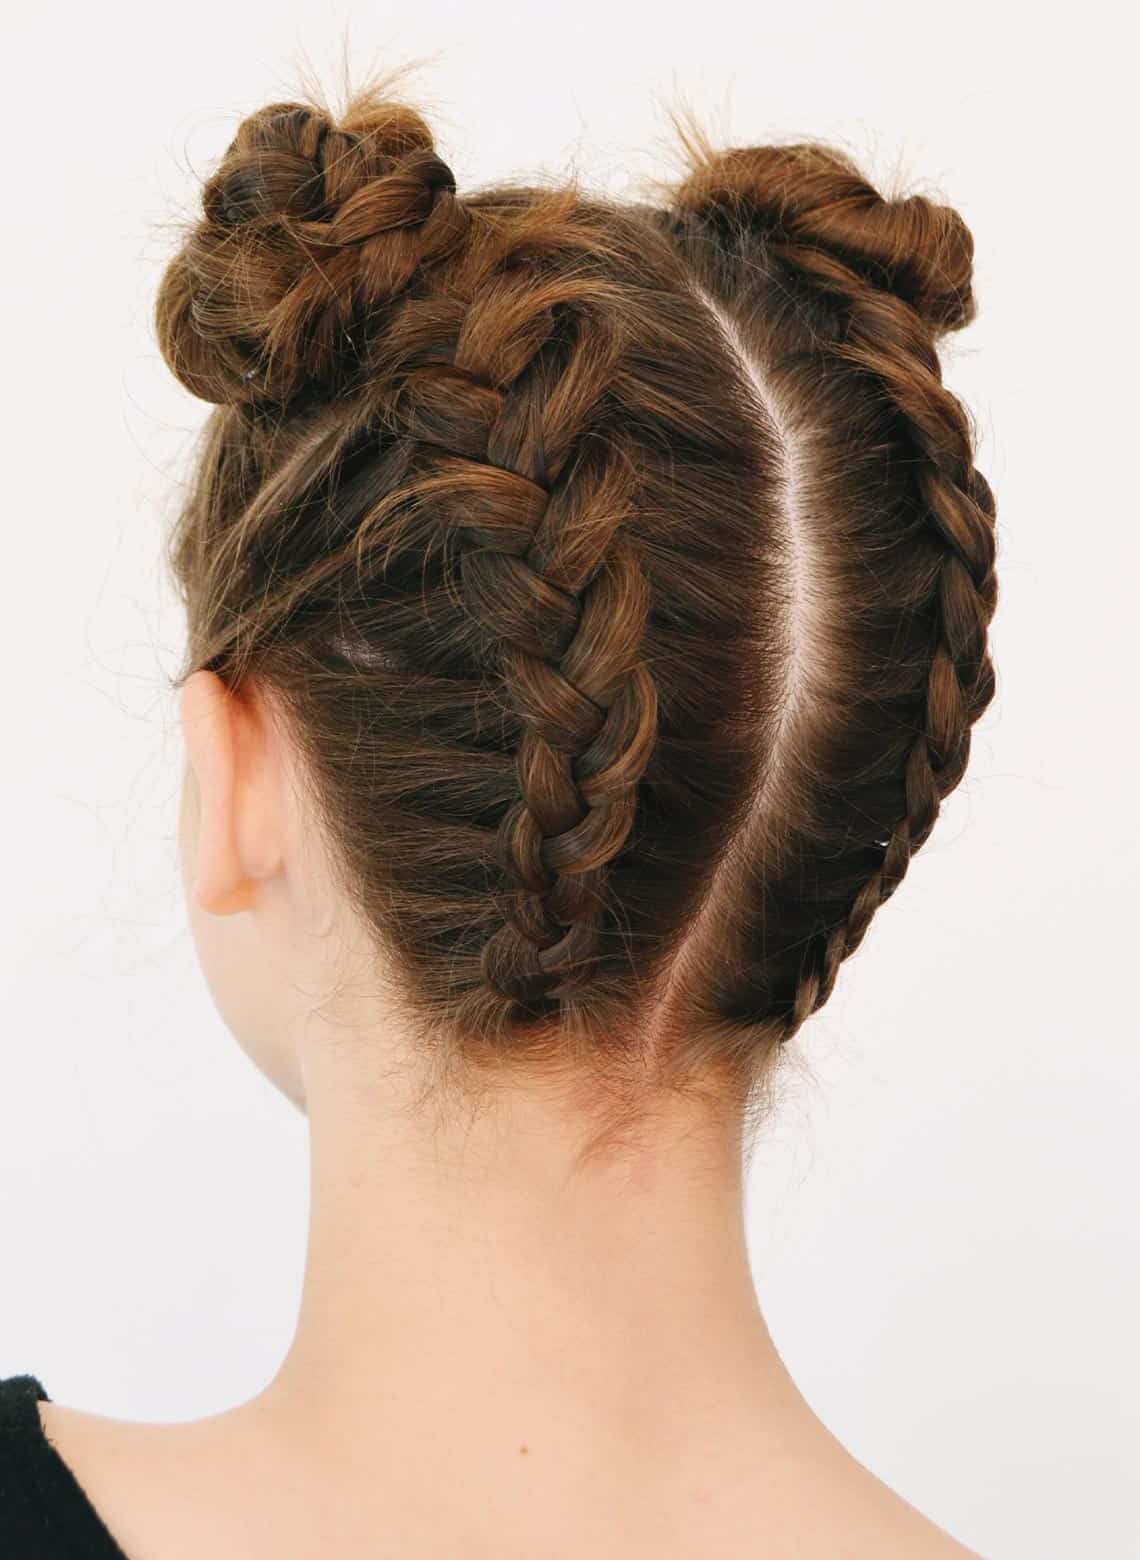 woman with braided space buns